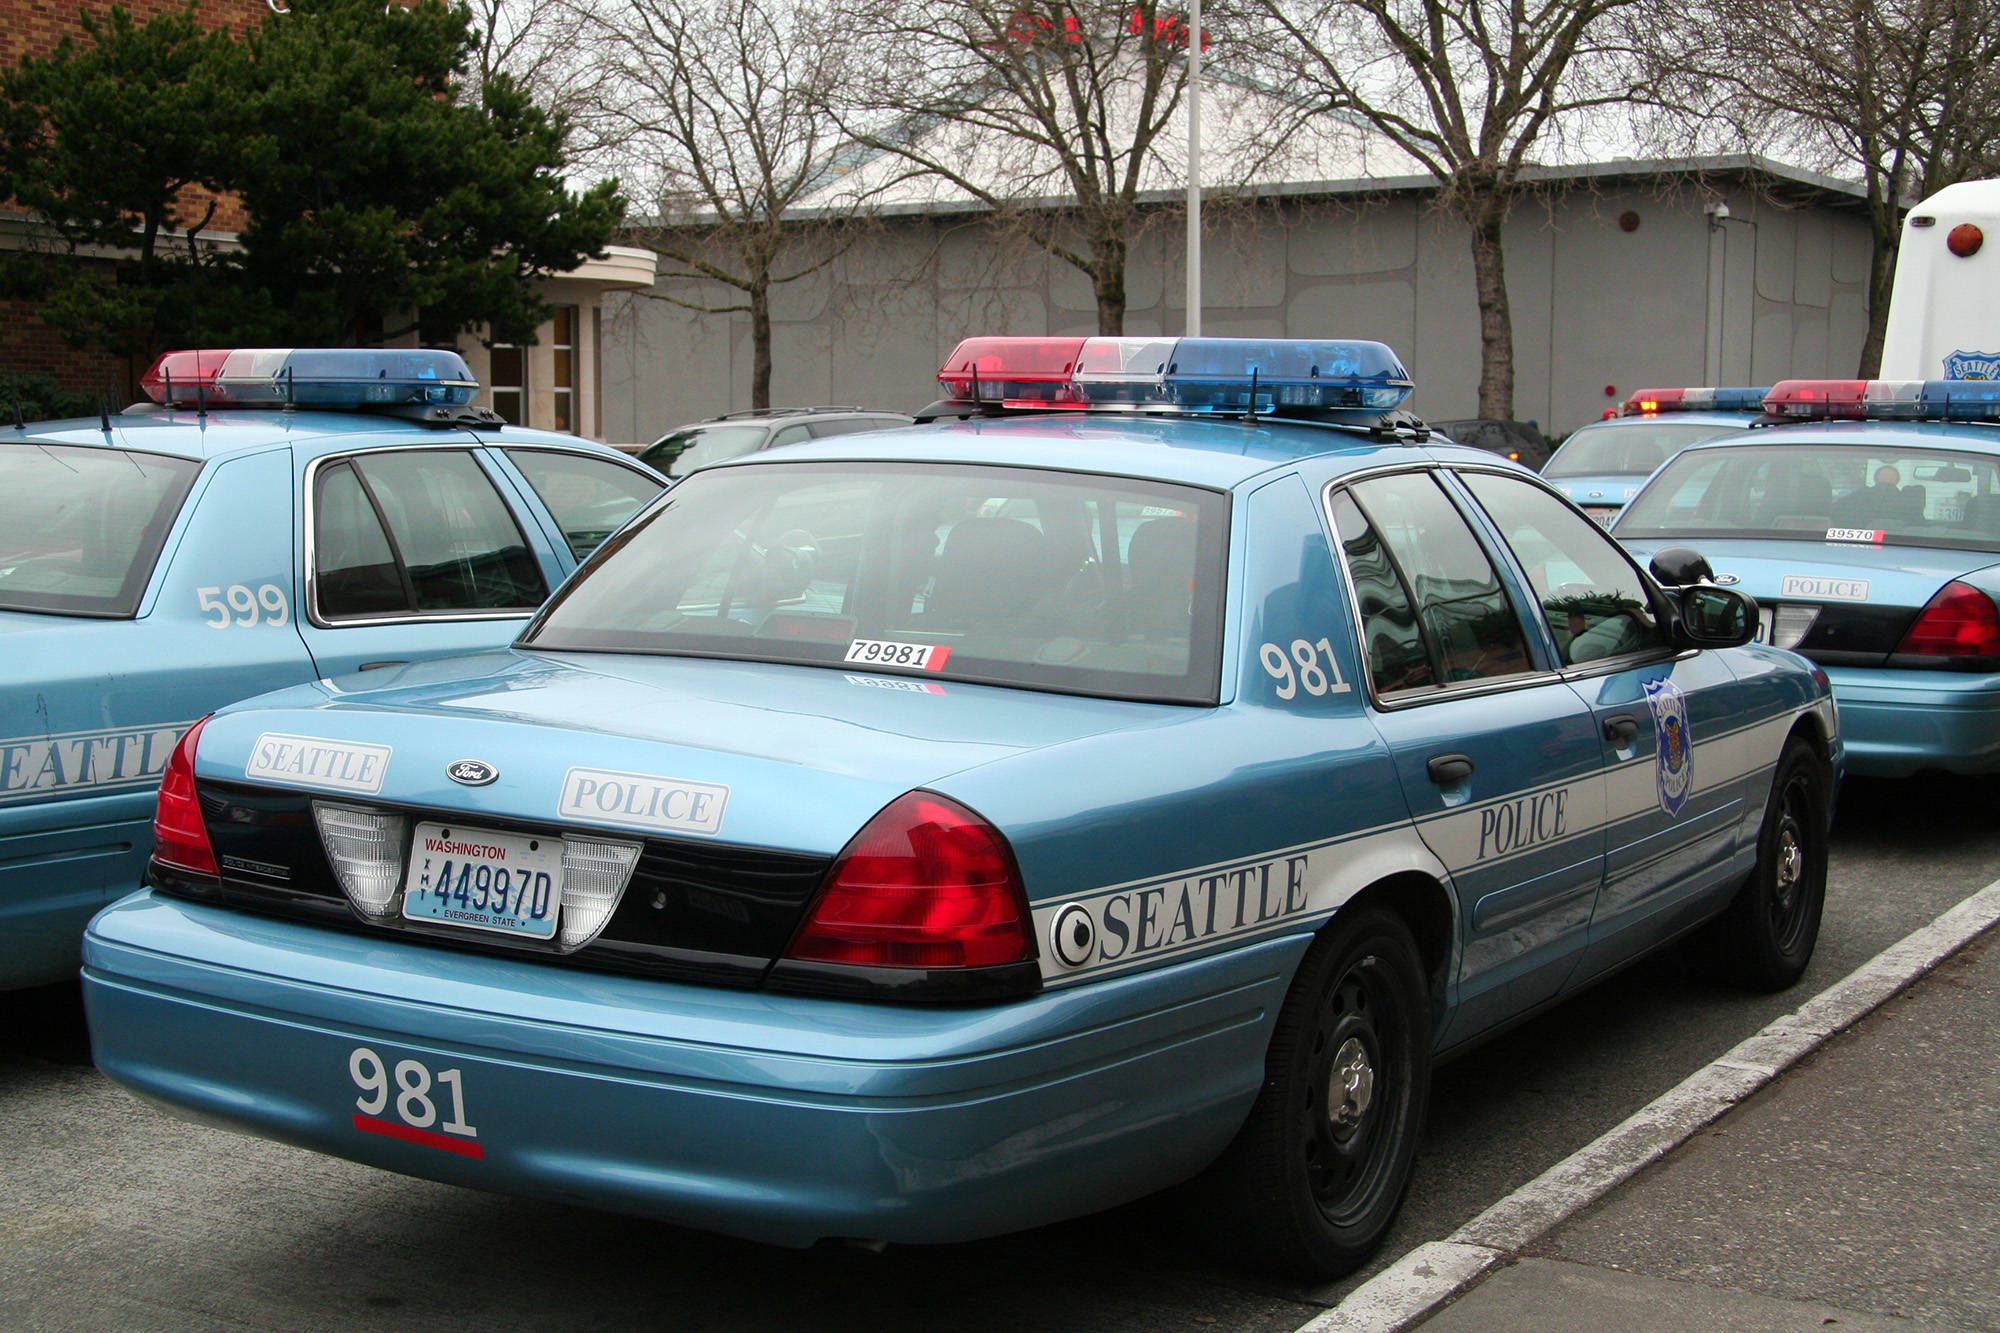 Seattle police car. Photo by Dmitri Fedortchenko, Flickr Creative Commons